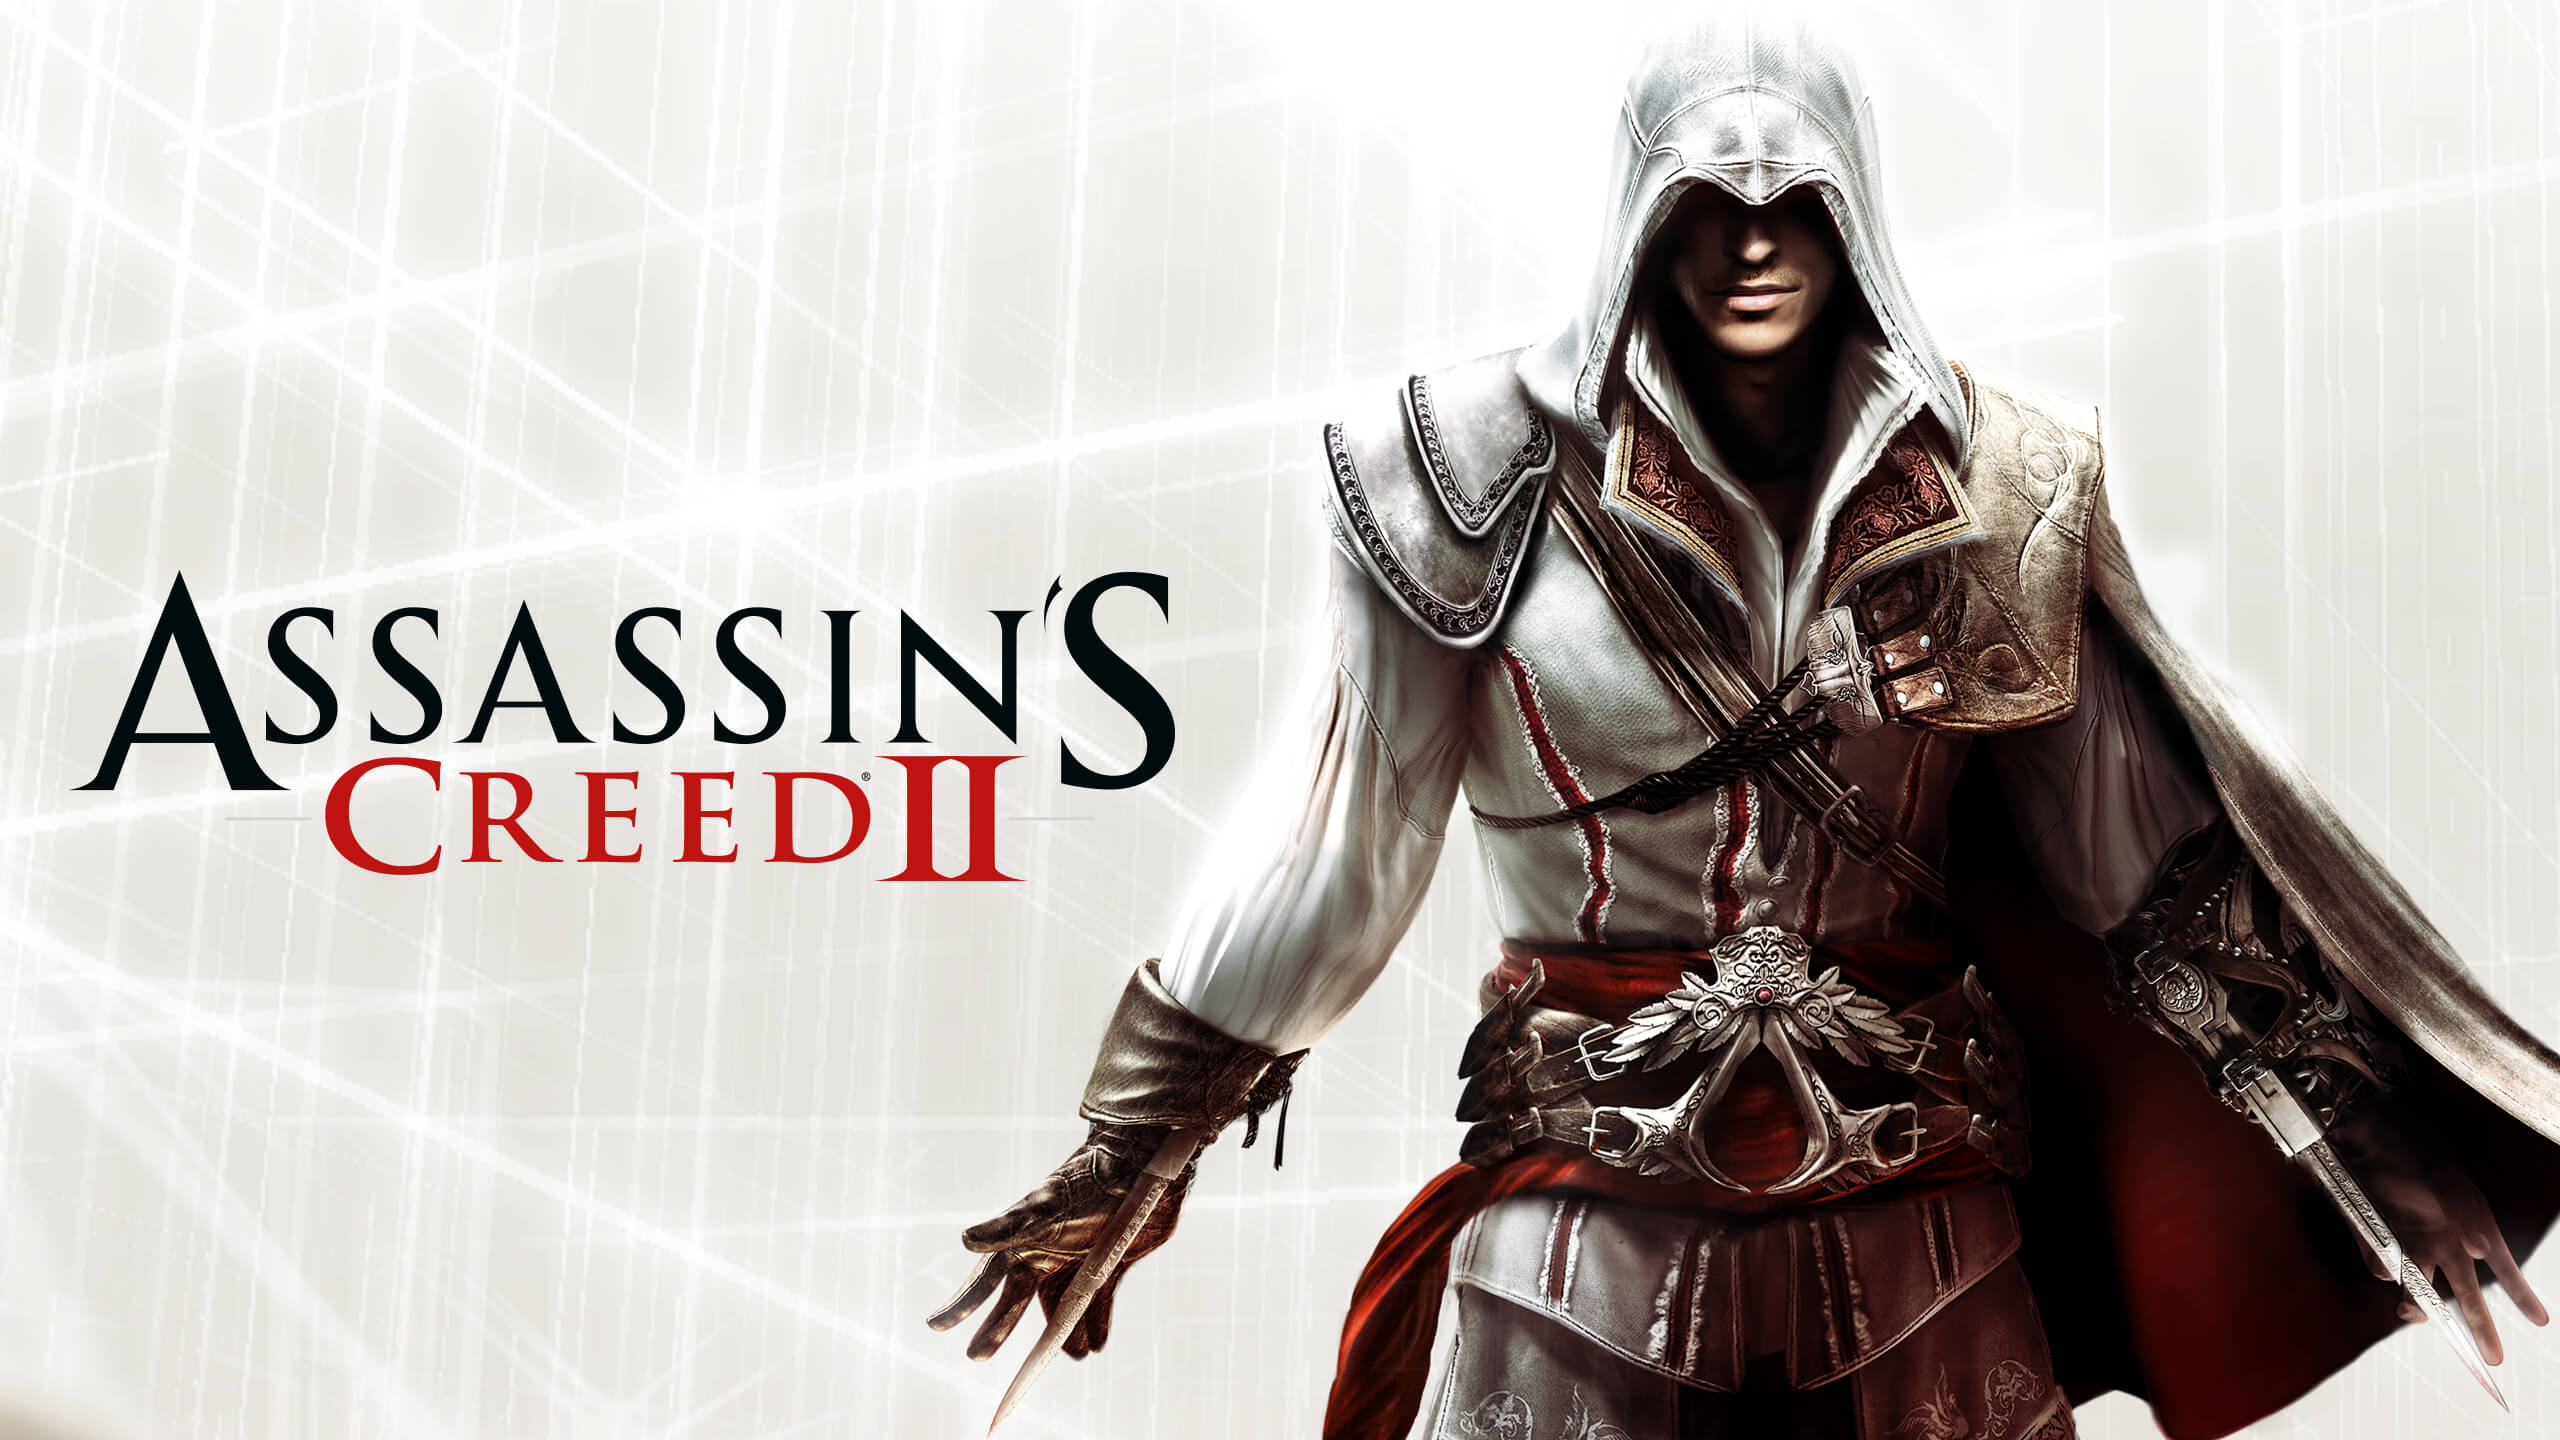 Assassin’s Creed II PC Version Game Free Download